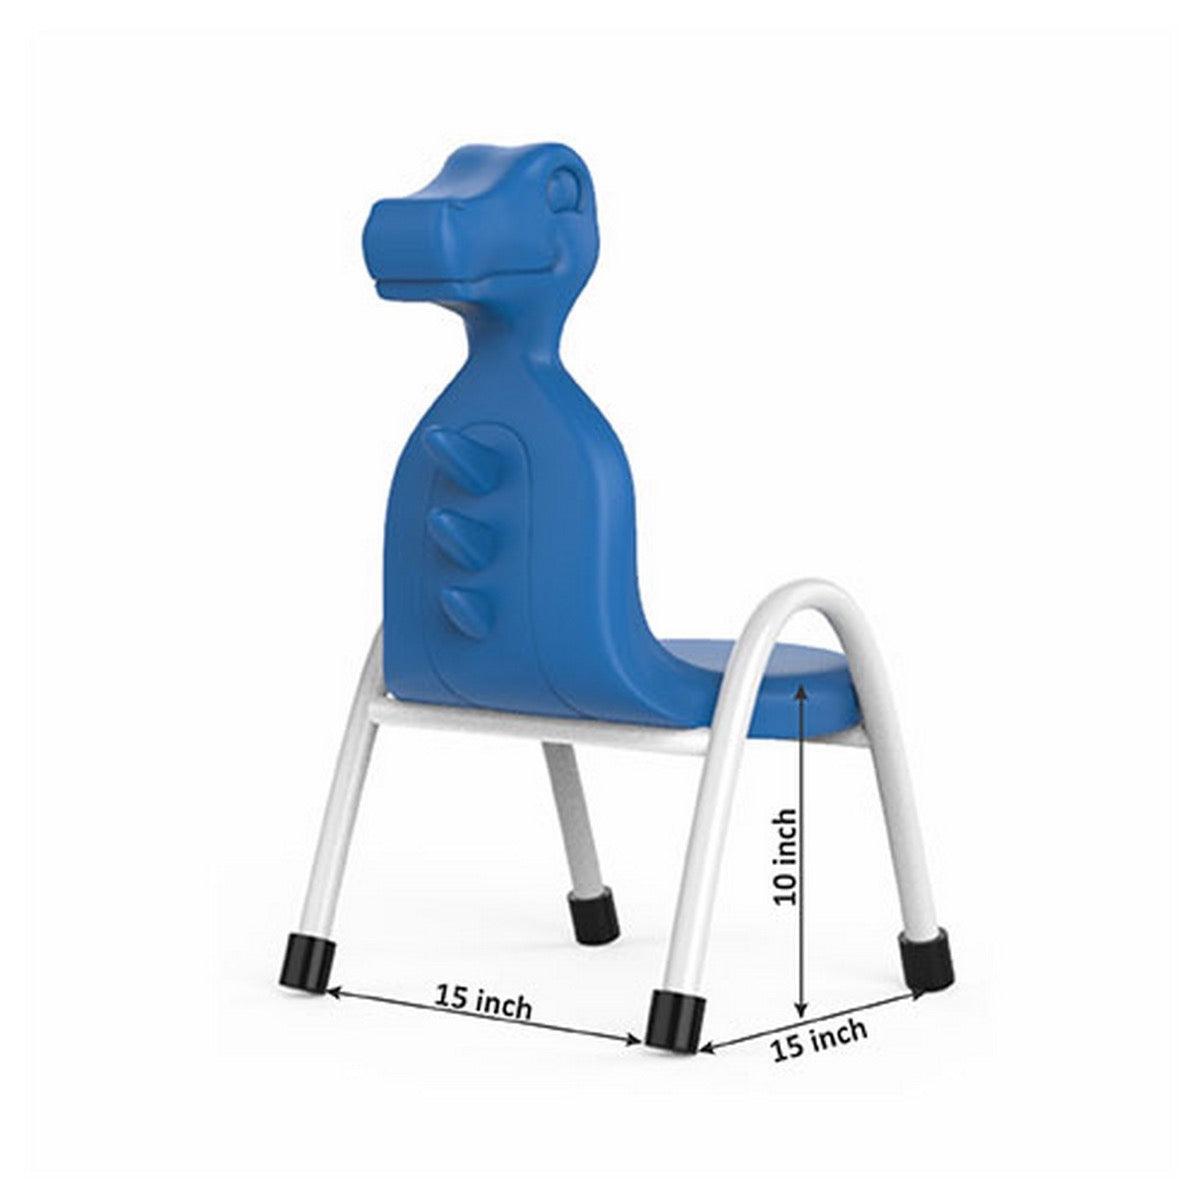 Ok Play Dino Chair, Study Chair, Sturdy And Durable Chair, Plastic Chair, Perfect For Home, Creches And School, Blue, 5 to 10 Years, Height 10 Inches